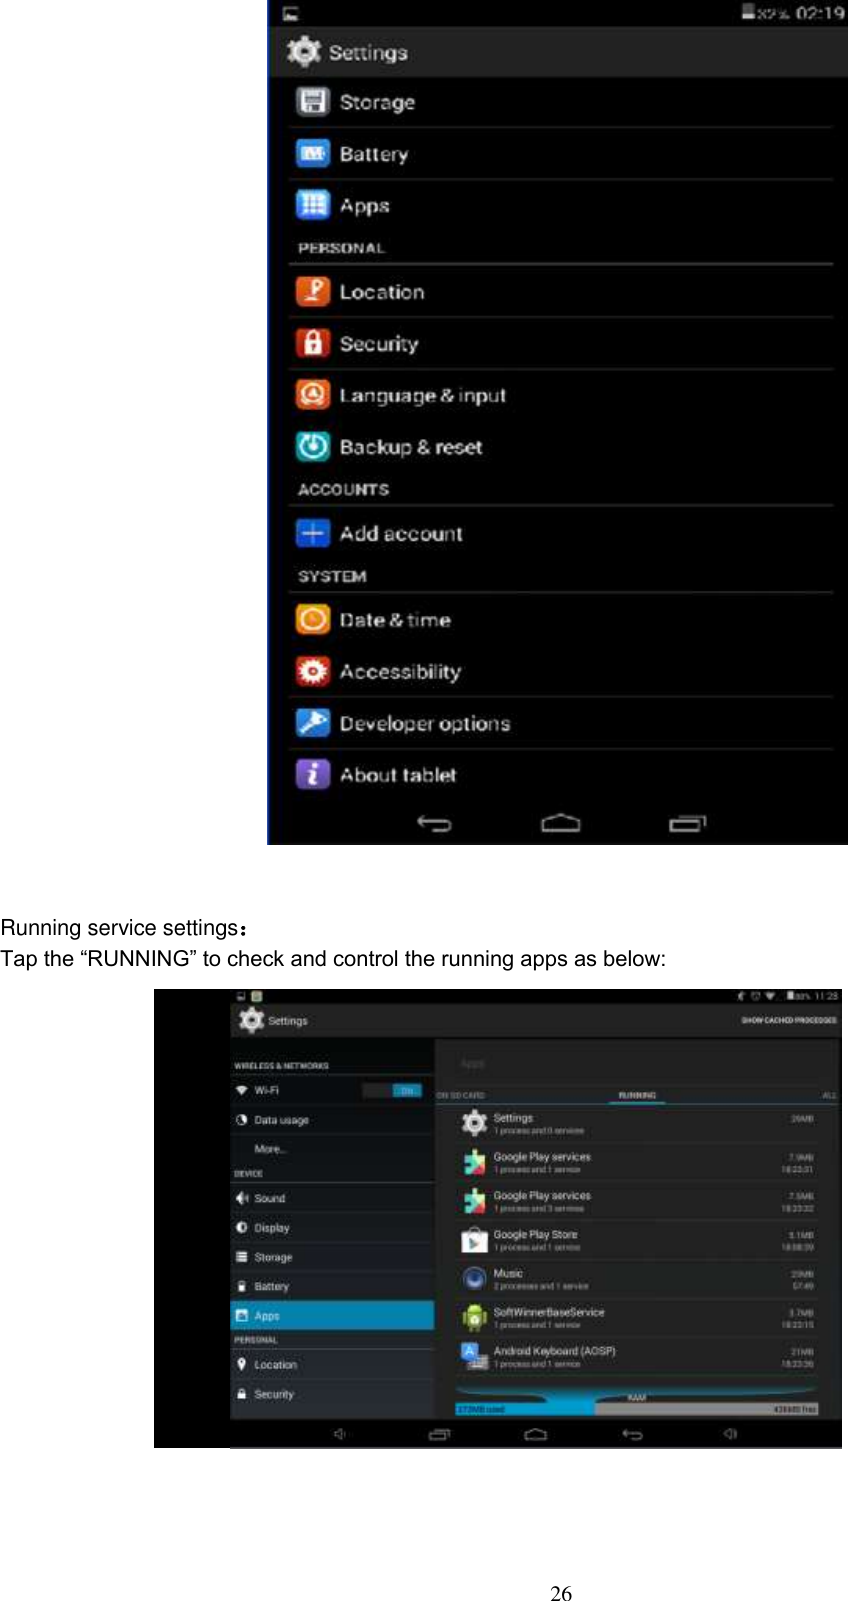  26    Running service settings： Tap the “RUNNING” to check and control the running apps as below:            